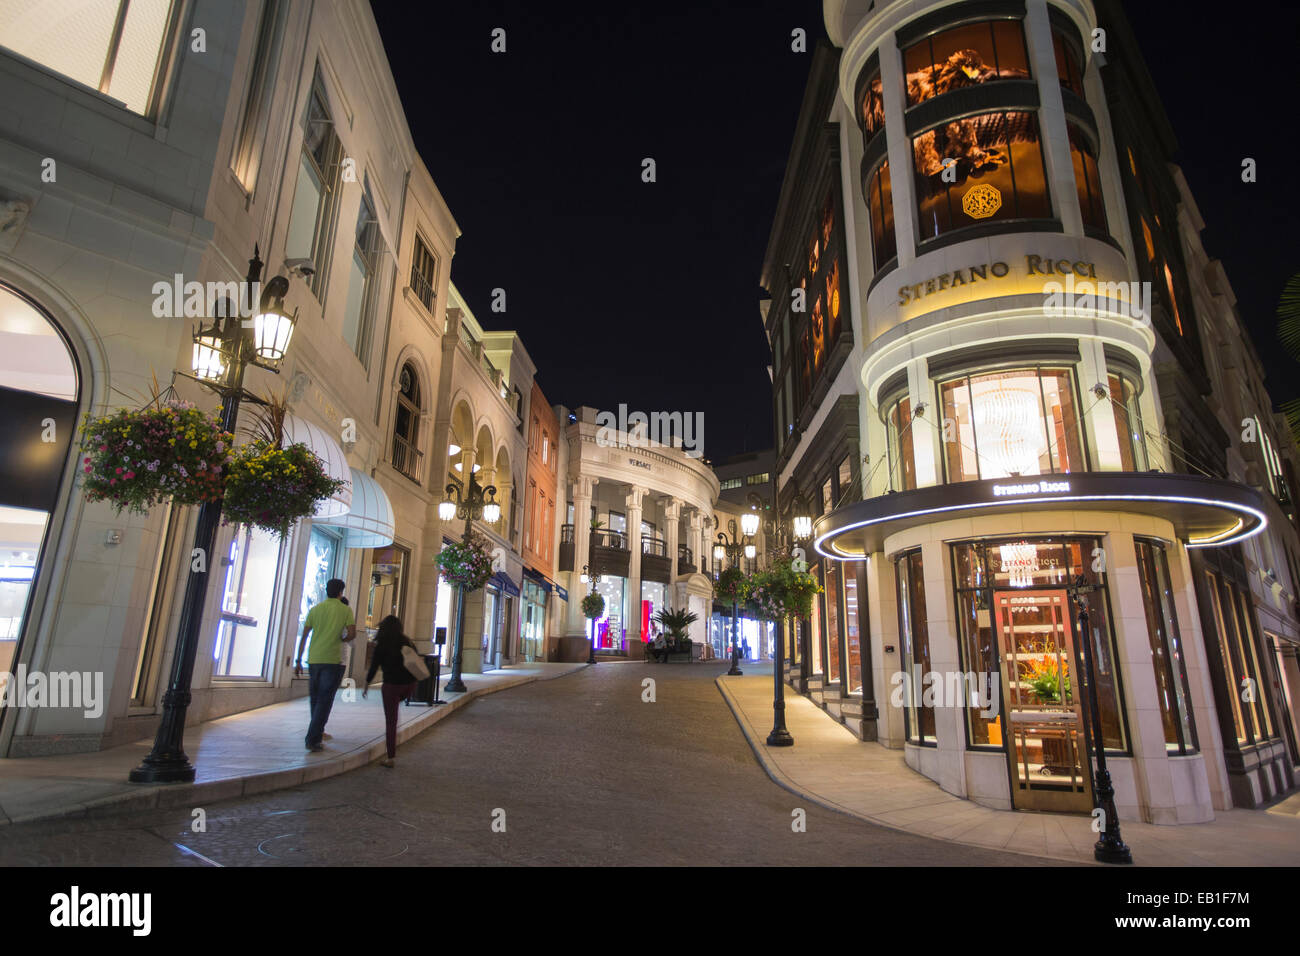 World famous Rodeo Drive in Beverly Hills at night foto de Stock